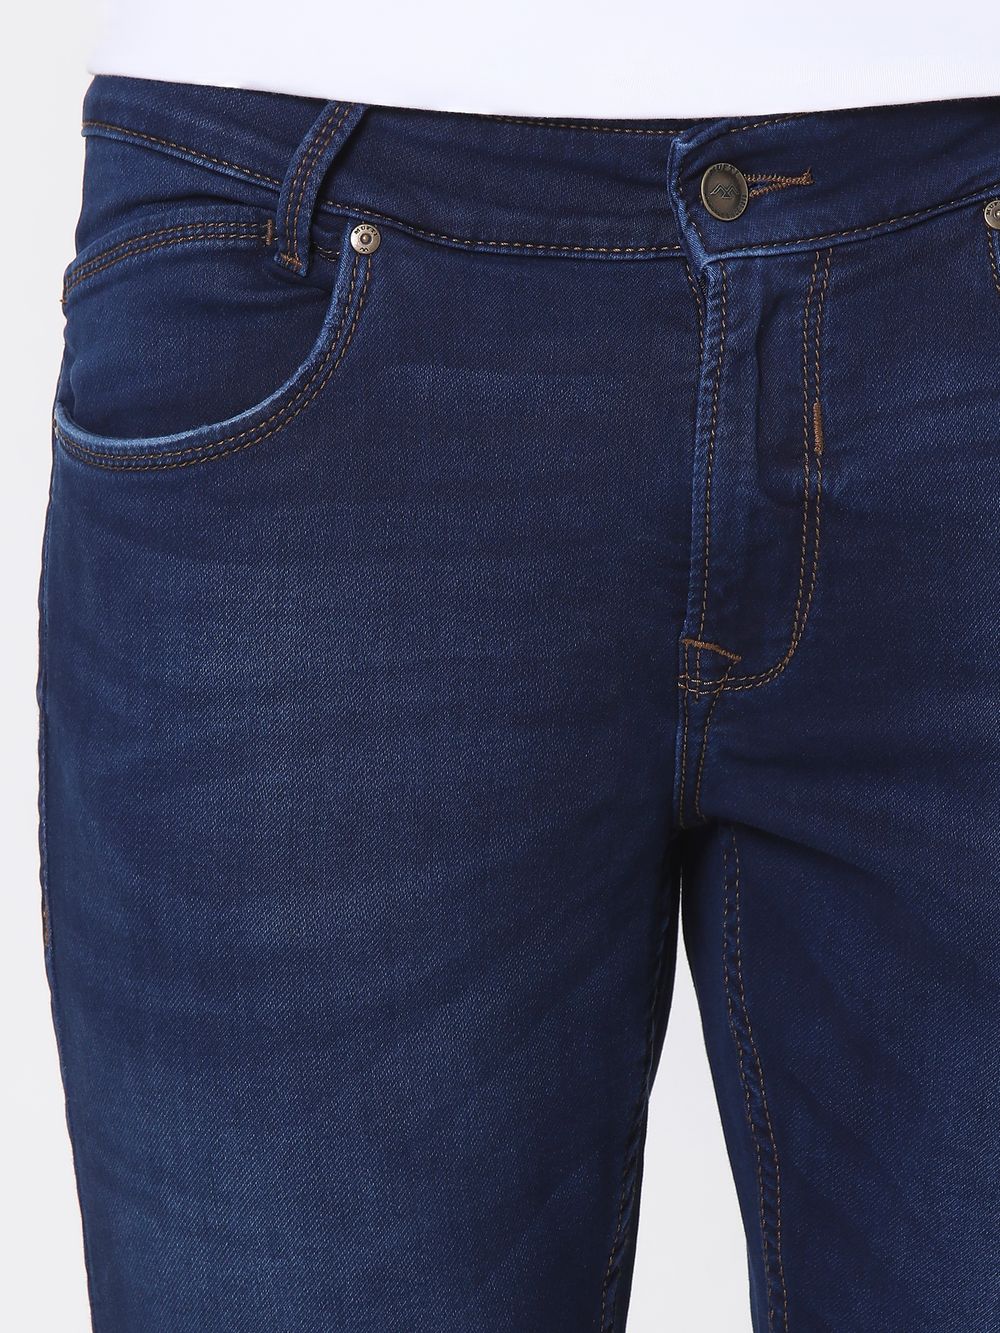 Dark Indigo Blue Ankle Length Fly Weight Jeans